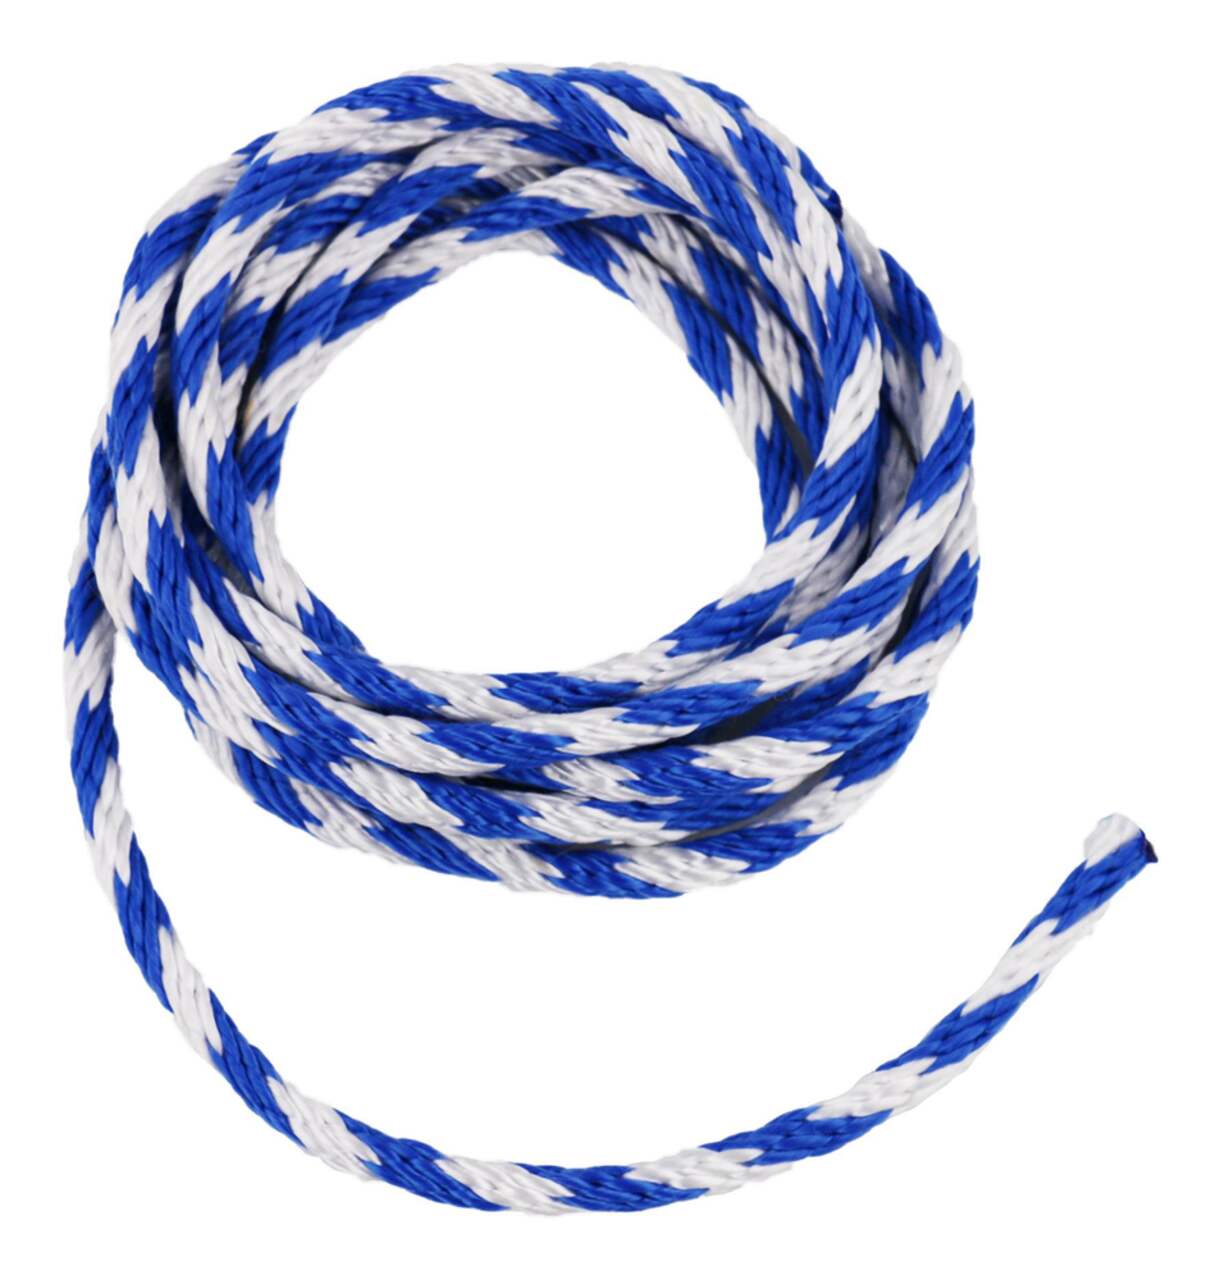 https://media-www.canadiantire.ca/product/fixing/hardware/general-hardware/0618605/double-braided-rope-1-4-poly-white-blue-b7db606a-9bdd-406a-918c-df9c3cd2874d.png?imdensity=1&imwidth=640&impolicy=mZoom